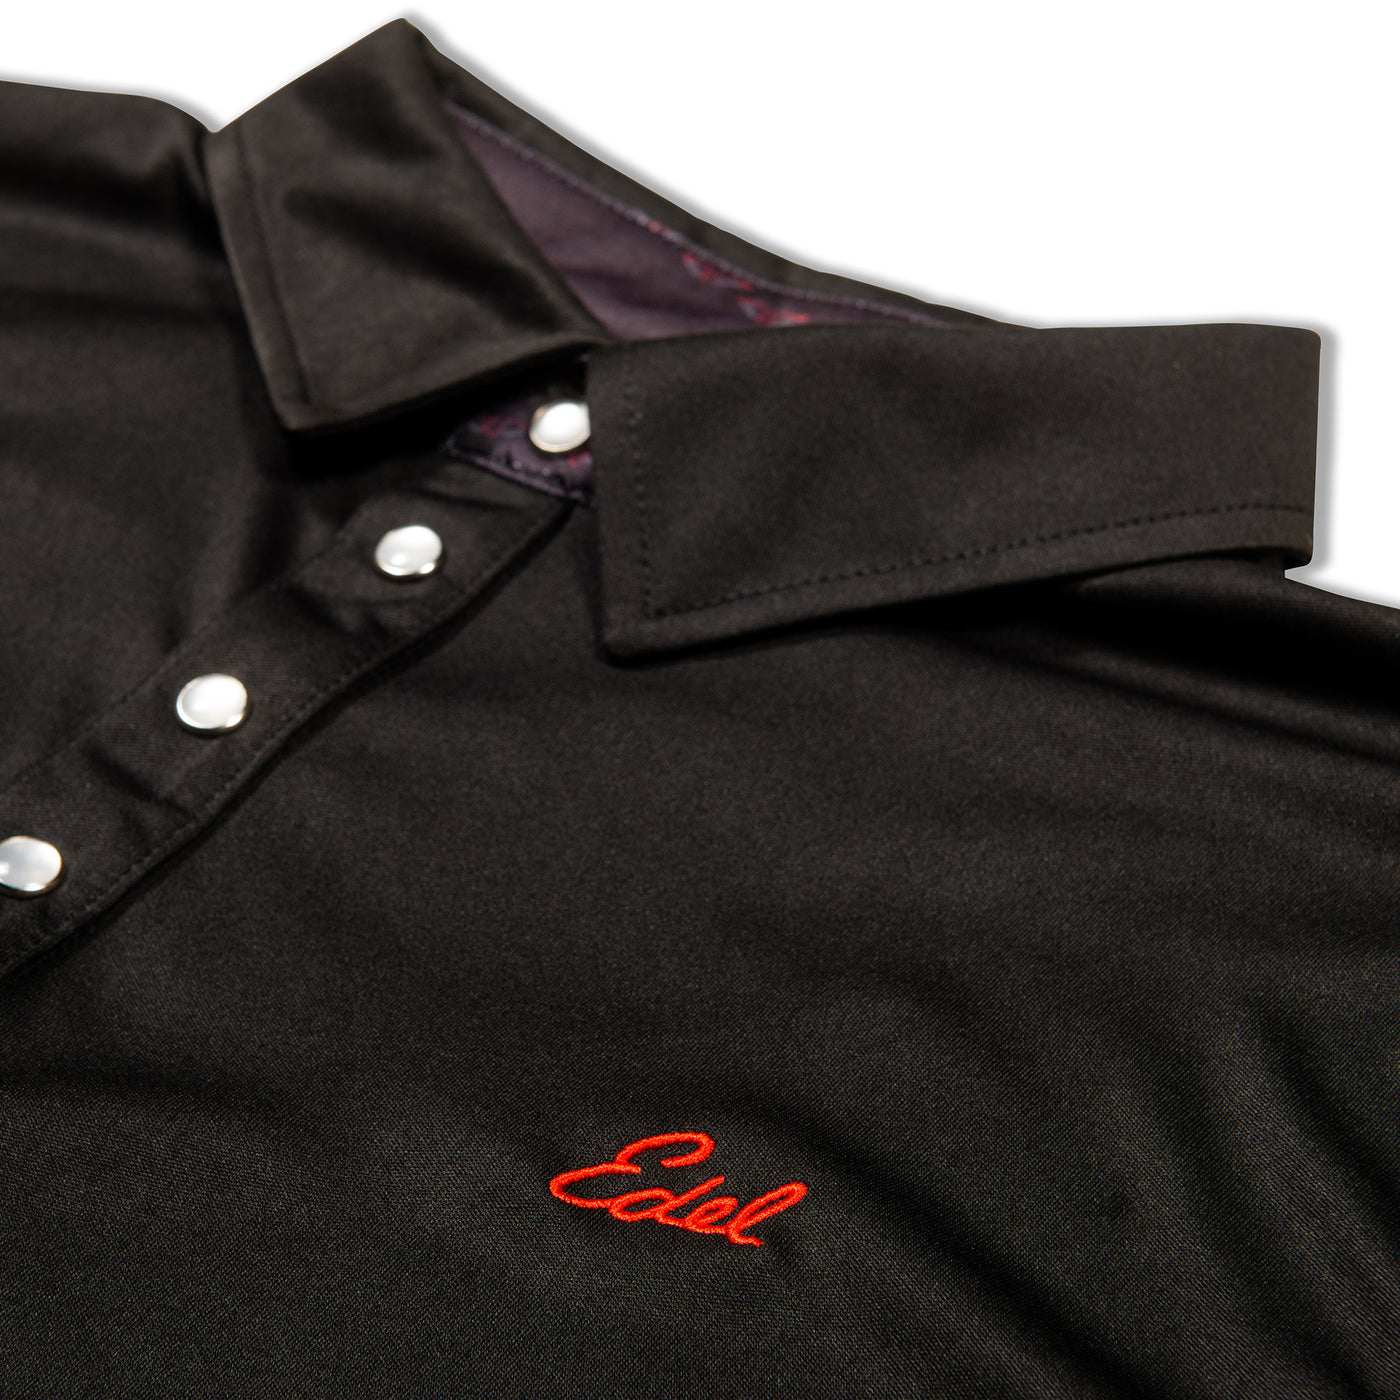 Black Edel Golf Polo w/ pearl snap buttons